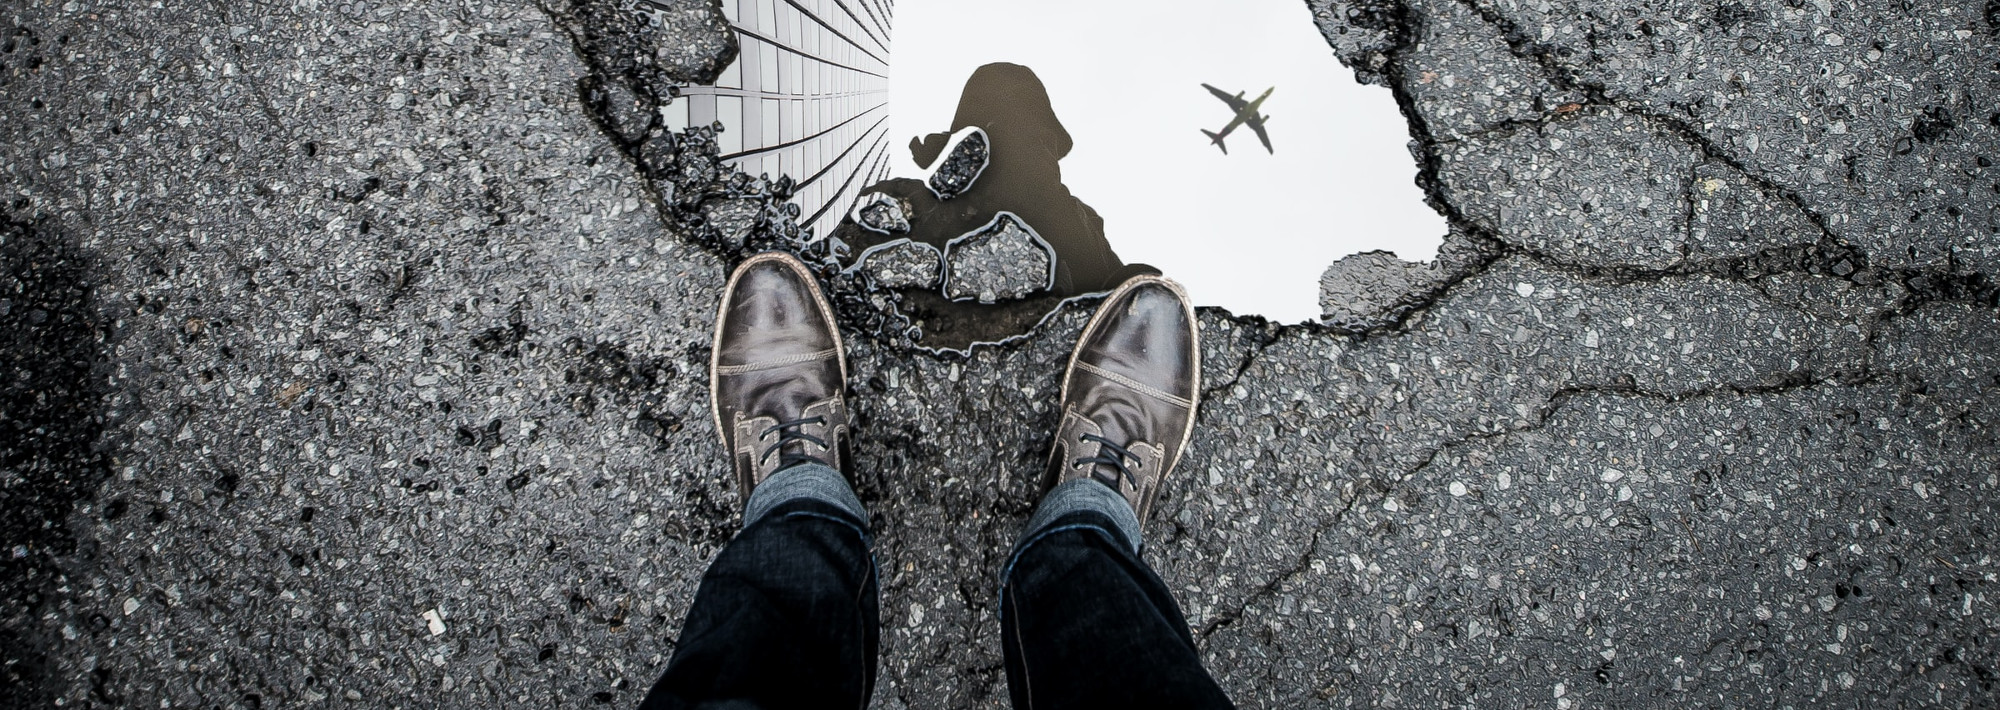 A person standing on a street, looking down at a puddle on the ground. The sky is reflected in the puddle.